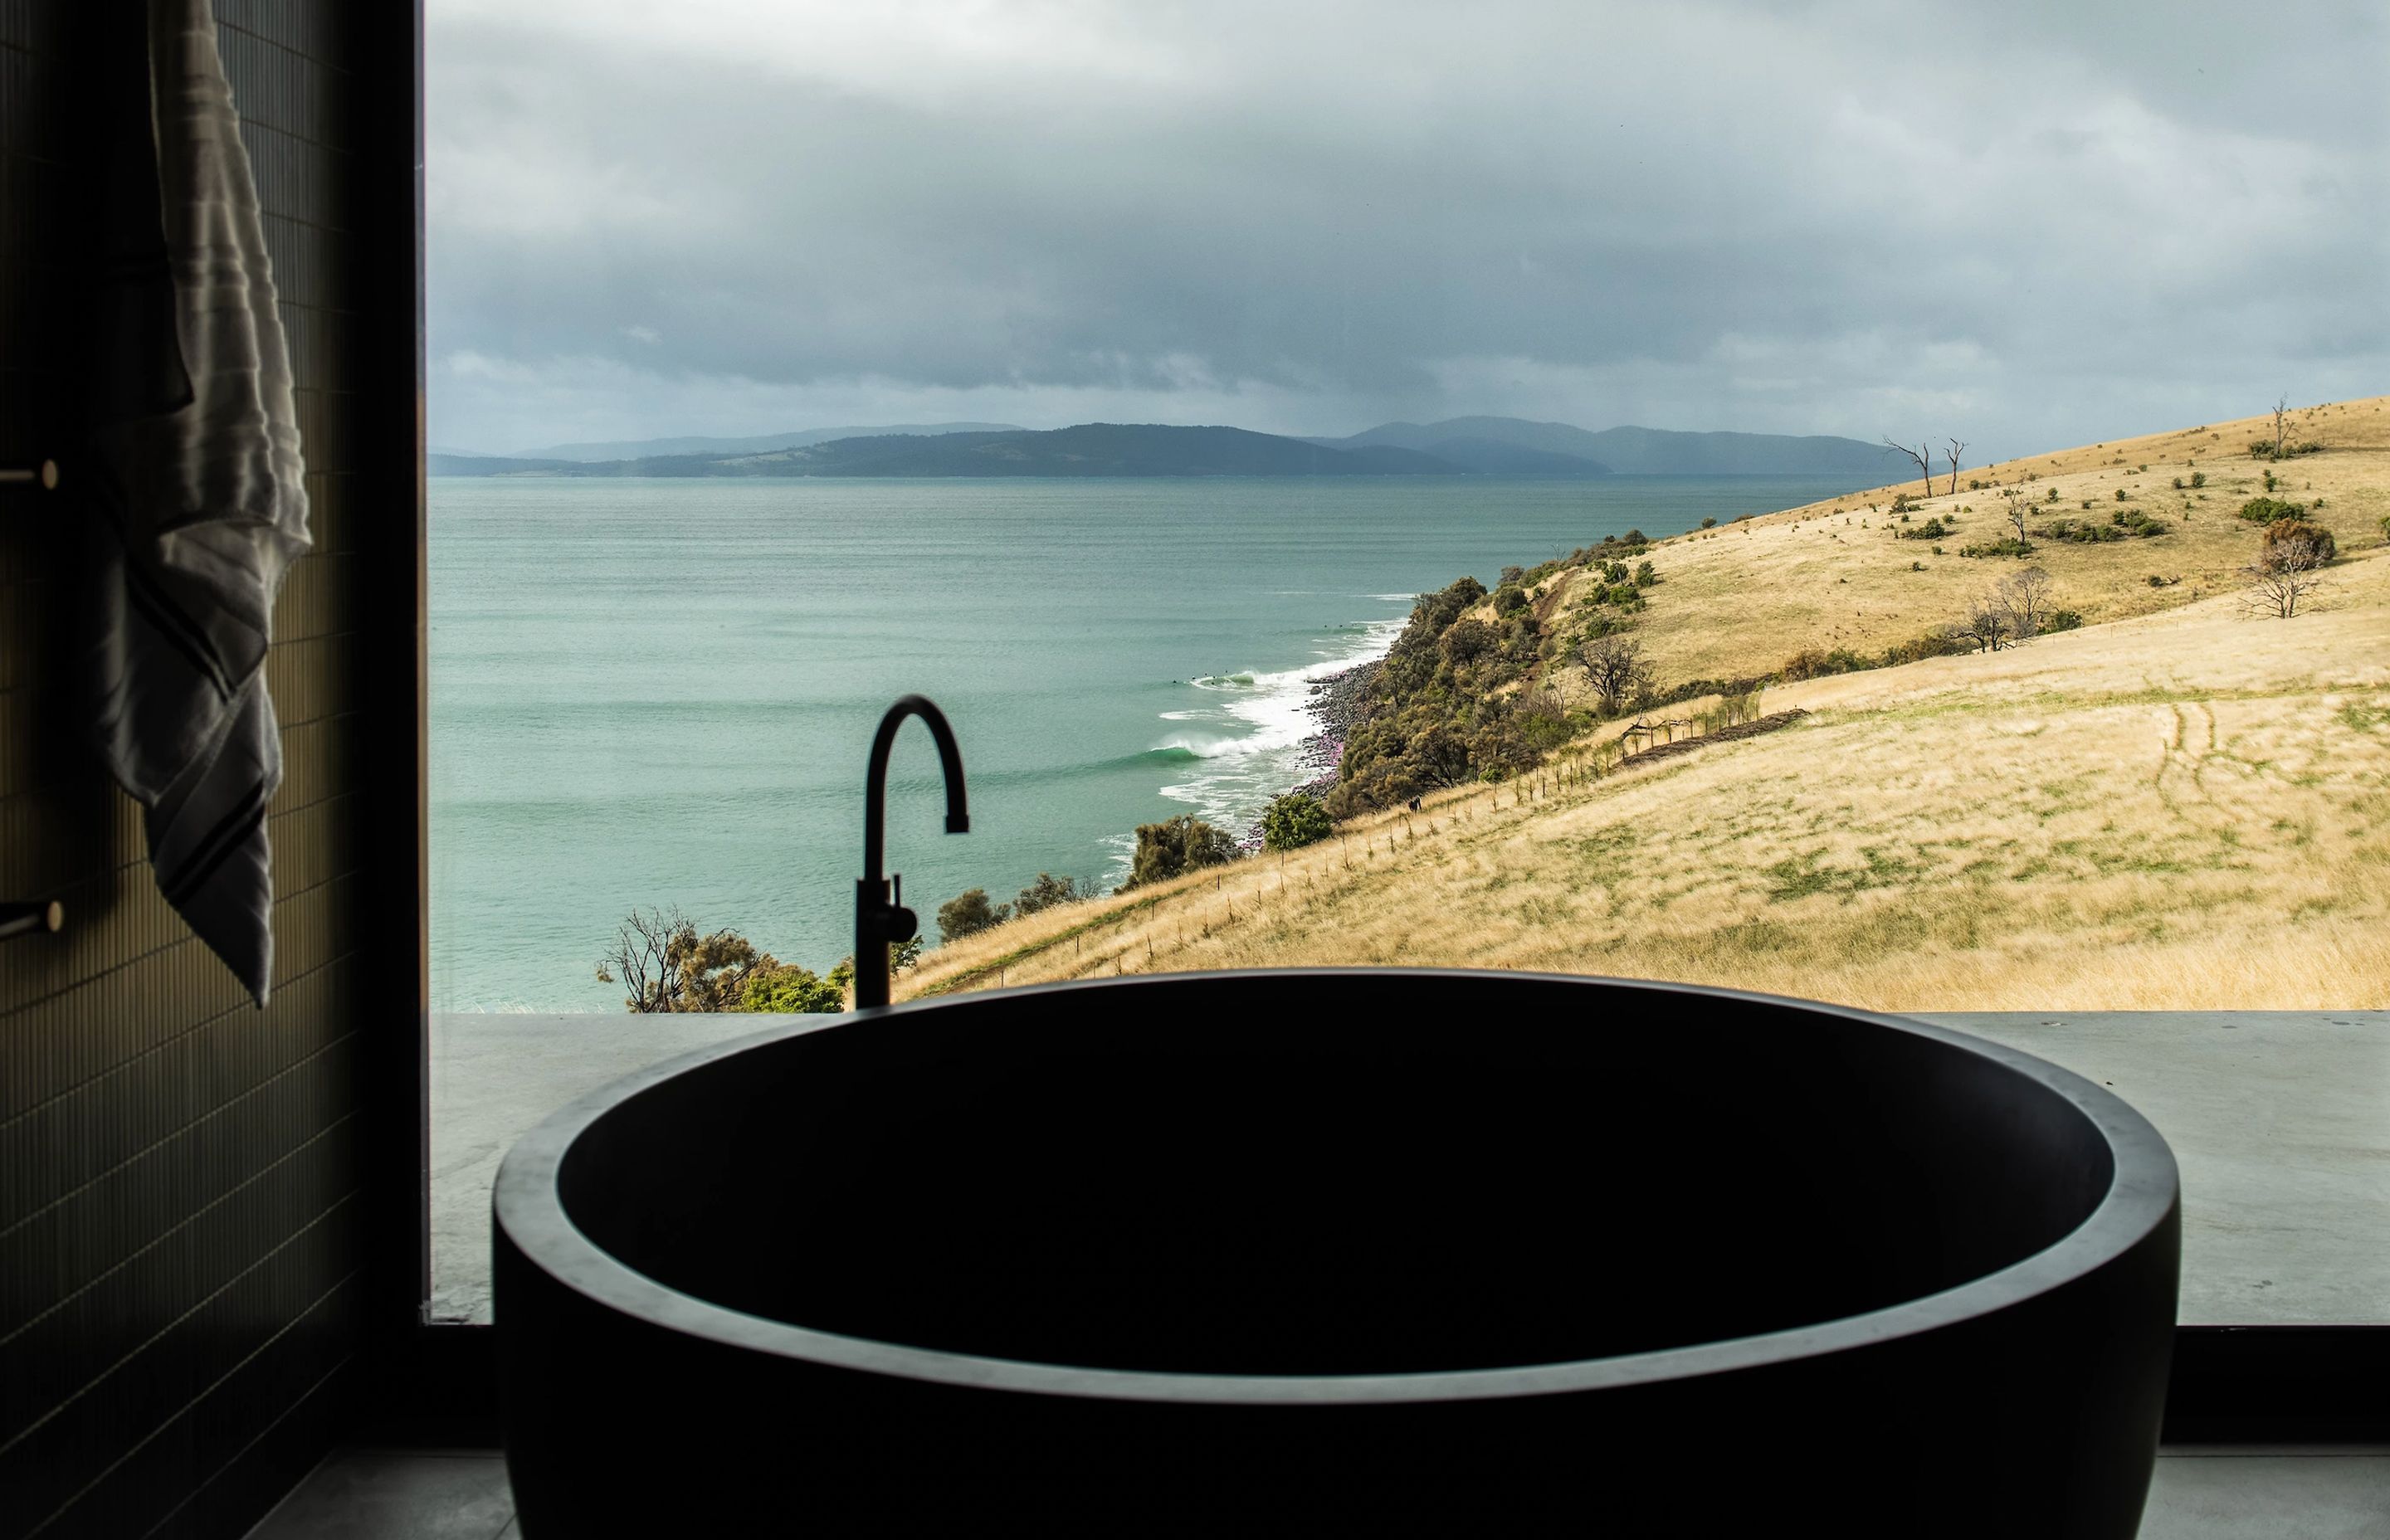 Positioned next to a large window, stone bathtubs can provide the ultimate in spa-like luxury.